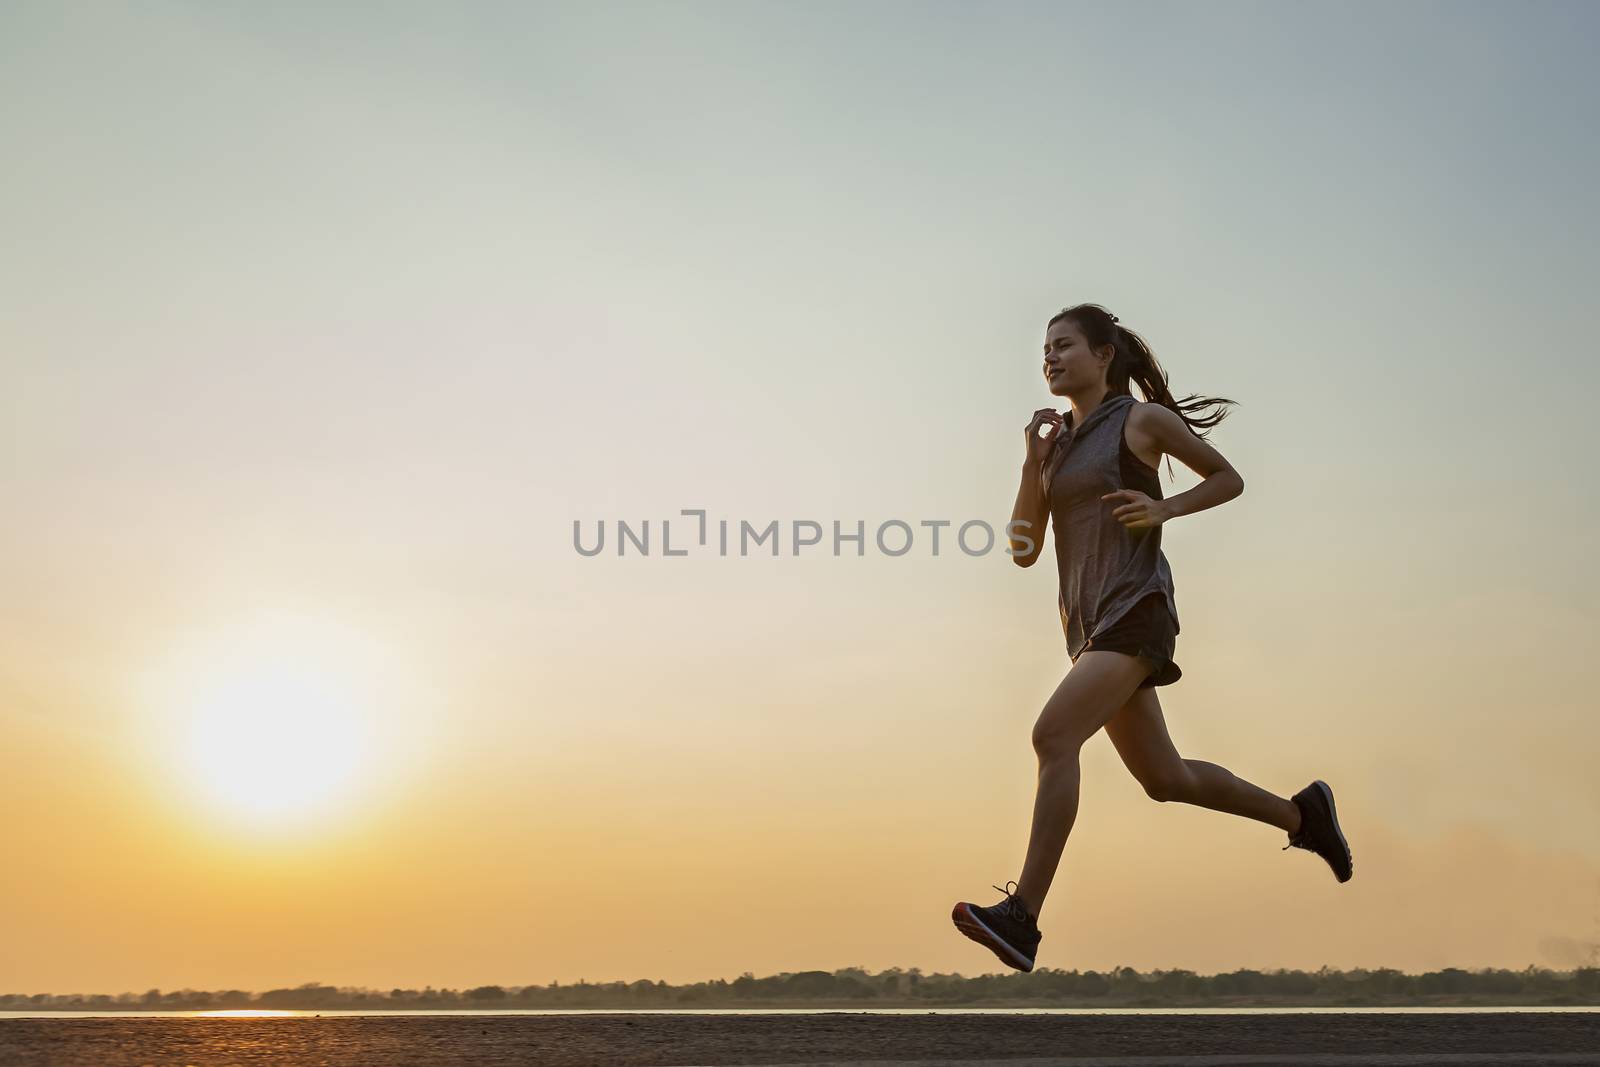 The silhouette of young women running and exercising at sunset with the sun in the background, colorful sunset sky
